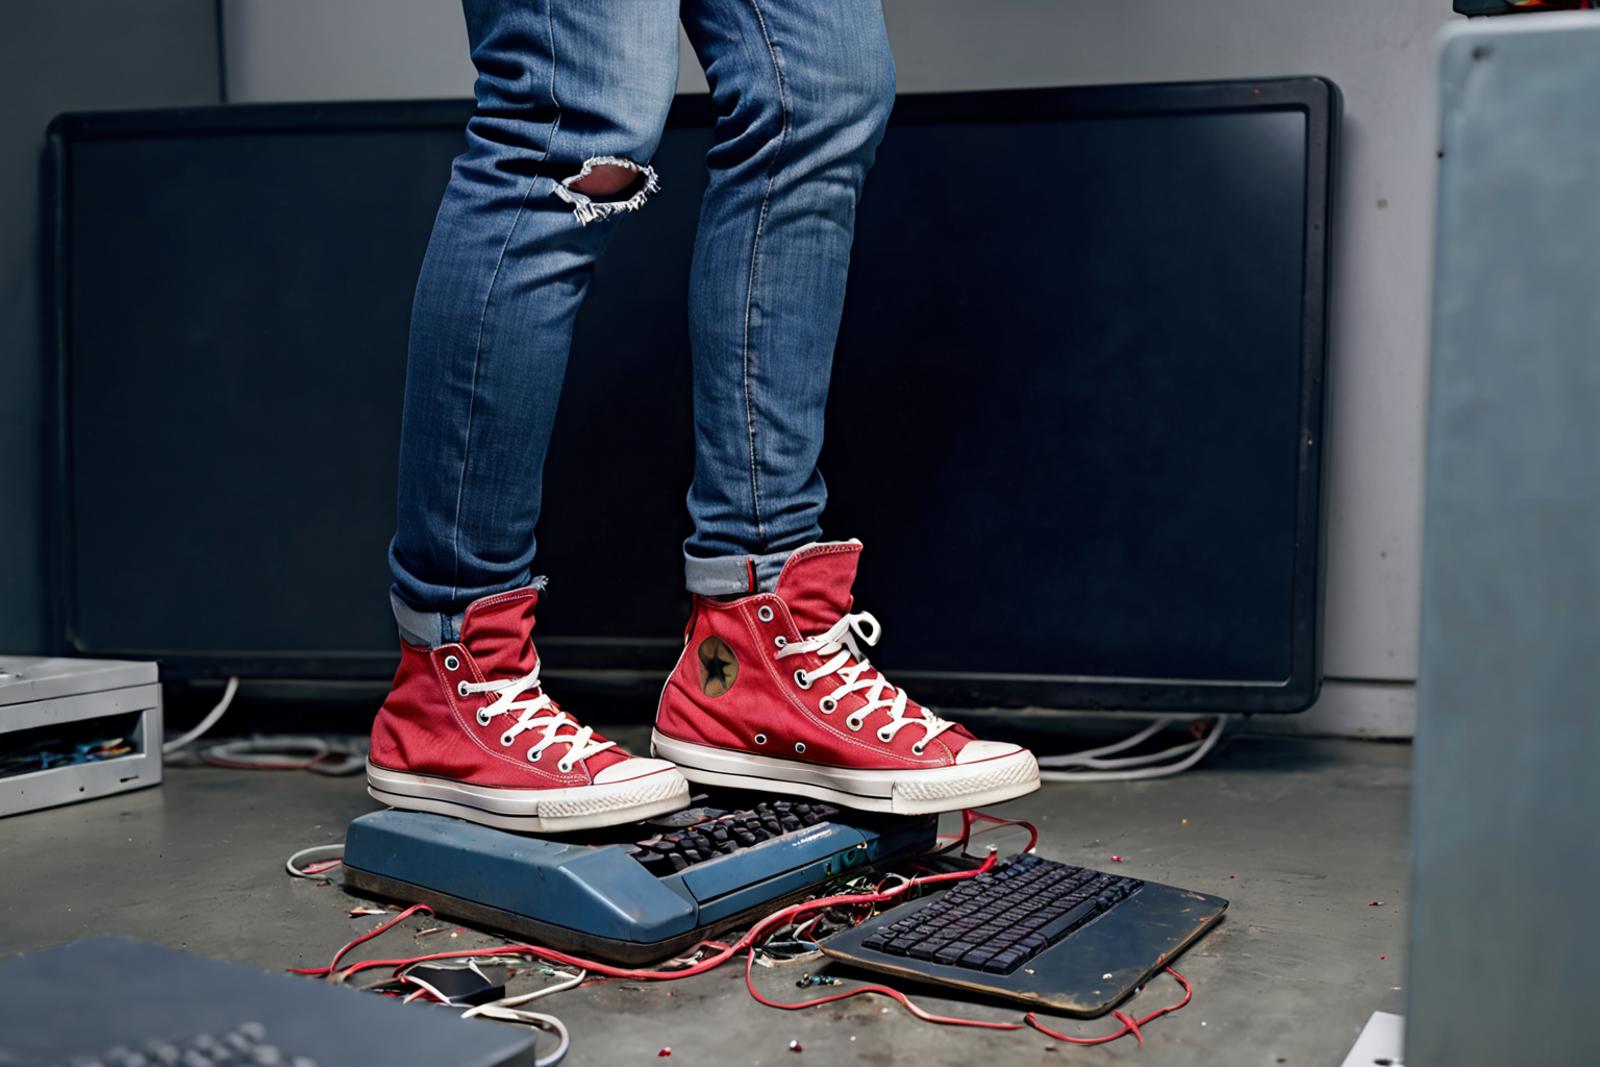 A person wearing red shoes standing on a keyboard in front of a television.